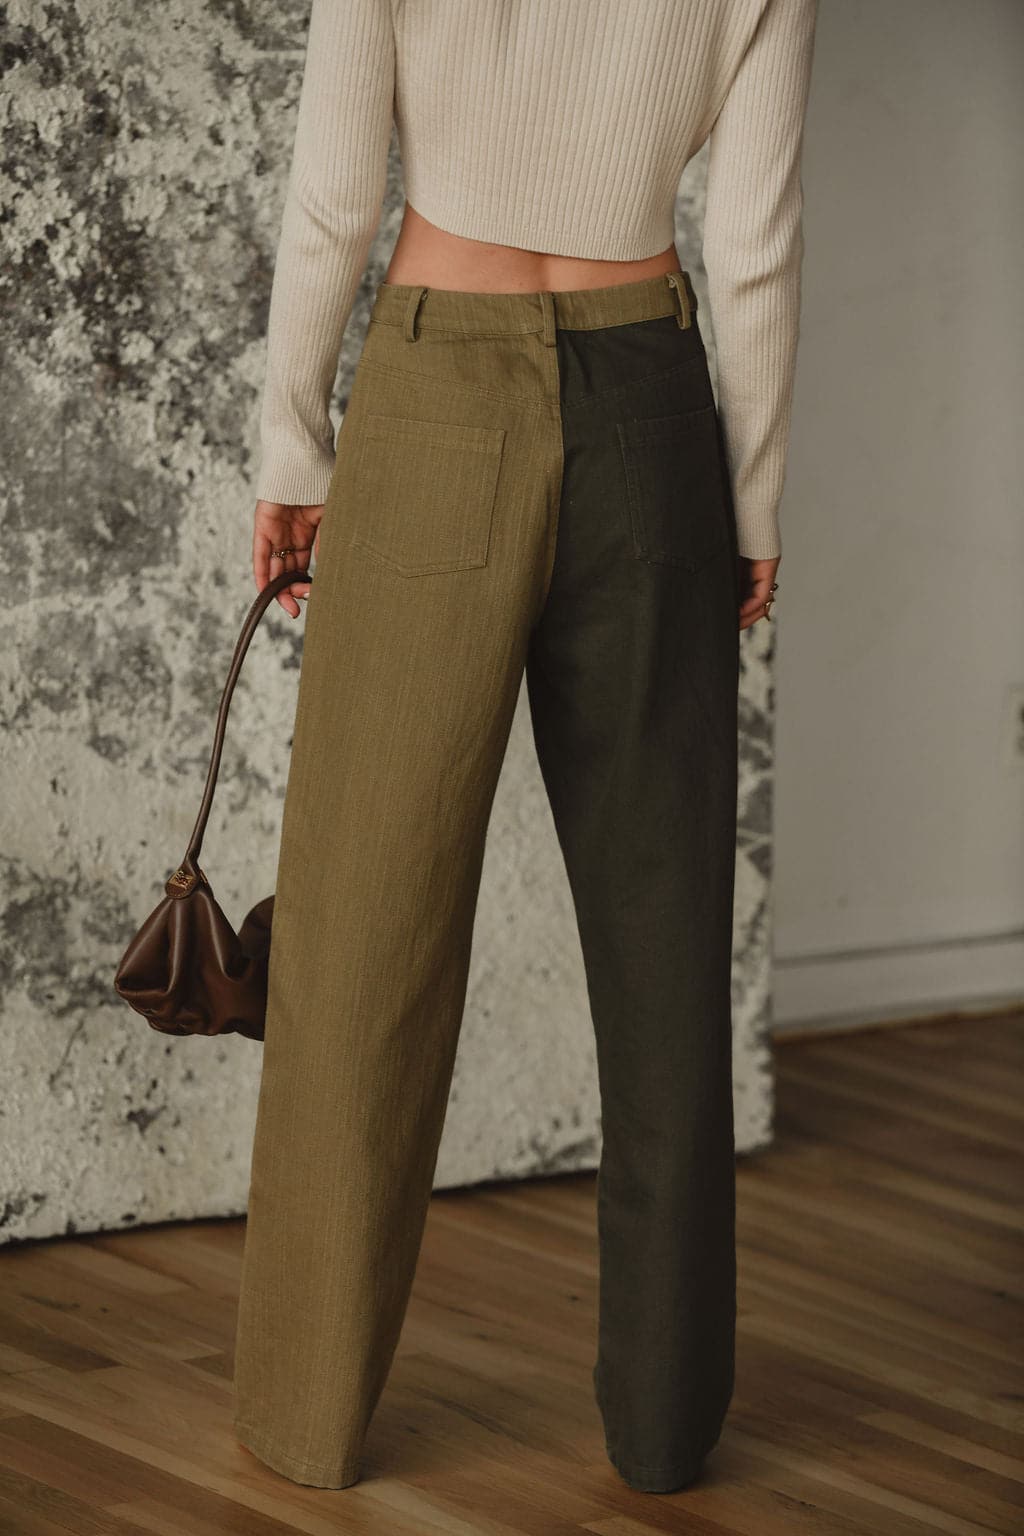 Kiley Olive Colorblock Trousers